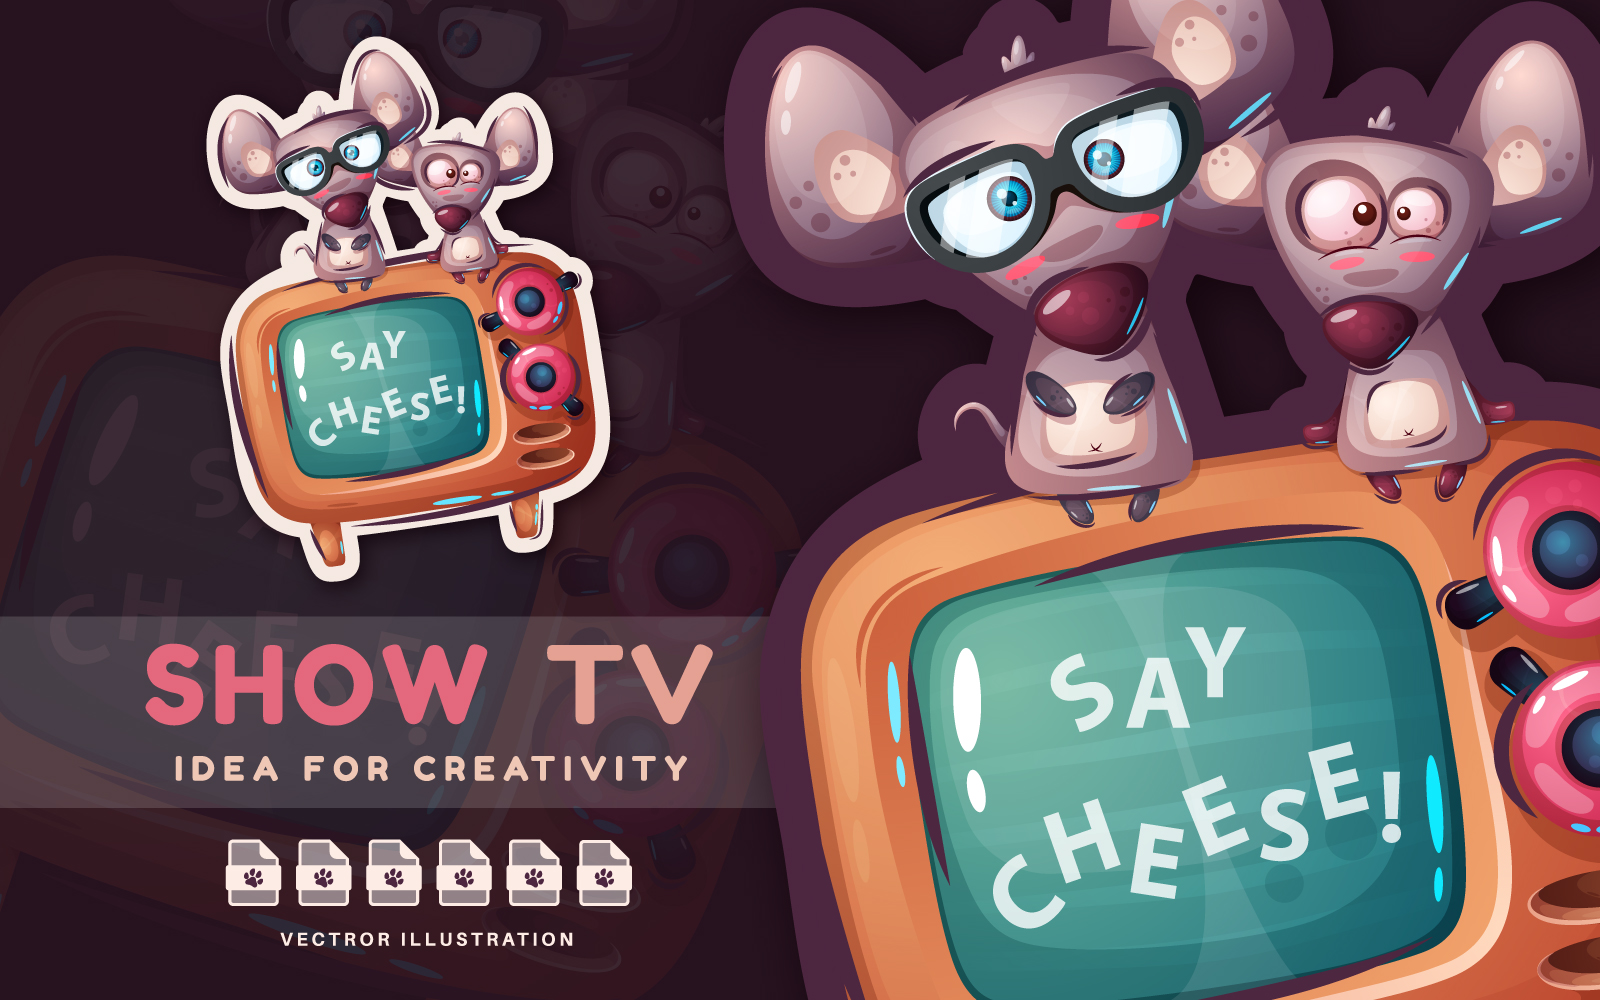 Two Cute Mice Watching The Show - Cute Sticker, Graphics Illustration